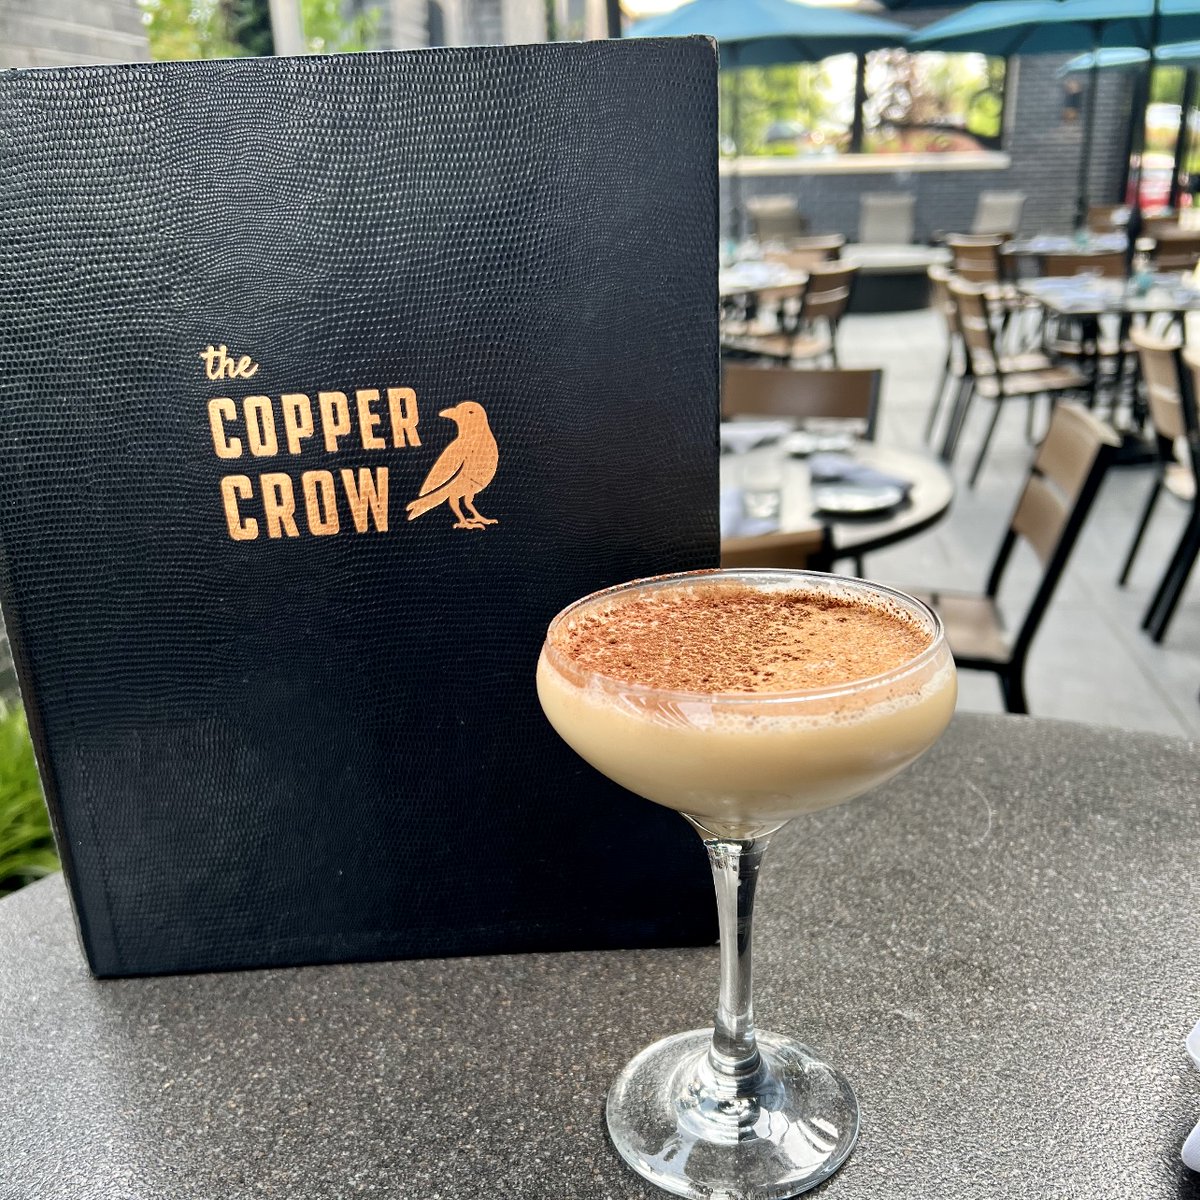 Celebrate National Bourbon Day by getting dirty…. with the Dirty Bourbon.  Crafted with bourbon infused with ripe bananas, Amaro, Frangelico, cream and chocolate bitters… this cocktail is delightful and not too heavy. #eatcrow
☎ - 267.855.CROW
💻 - ow.ly/7nPm50FWfcQ